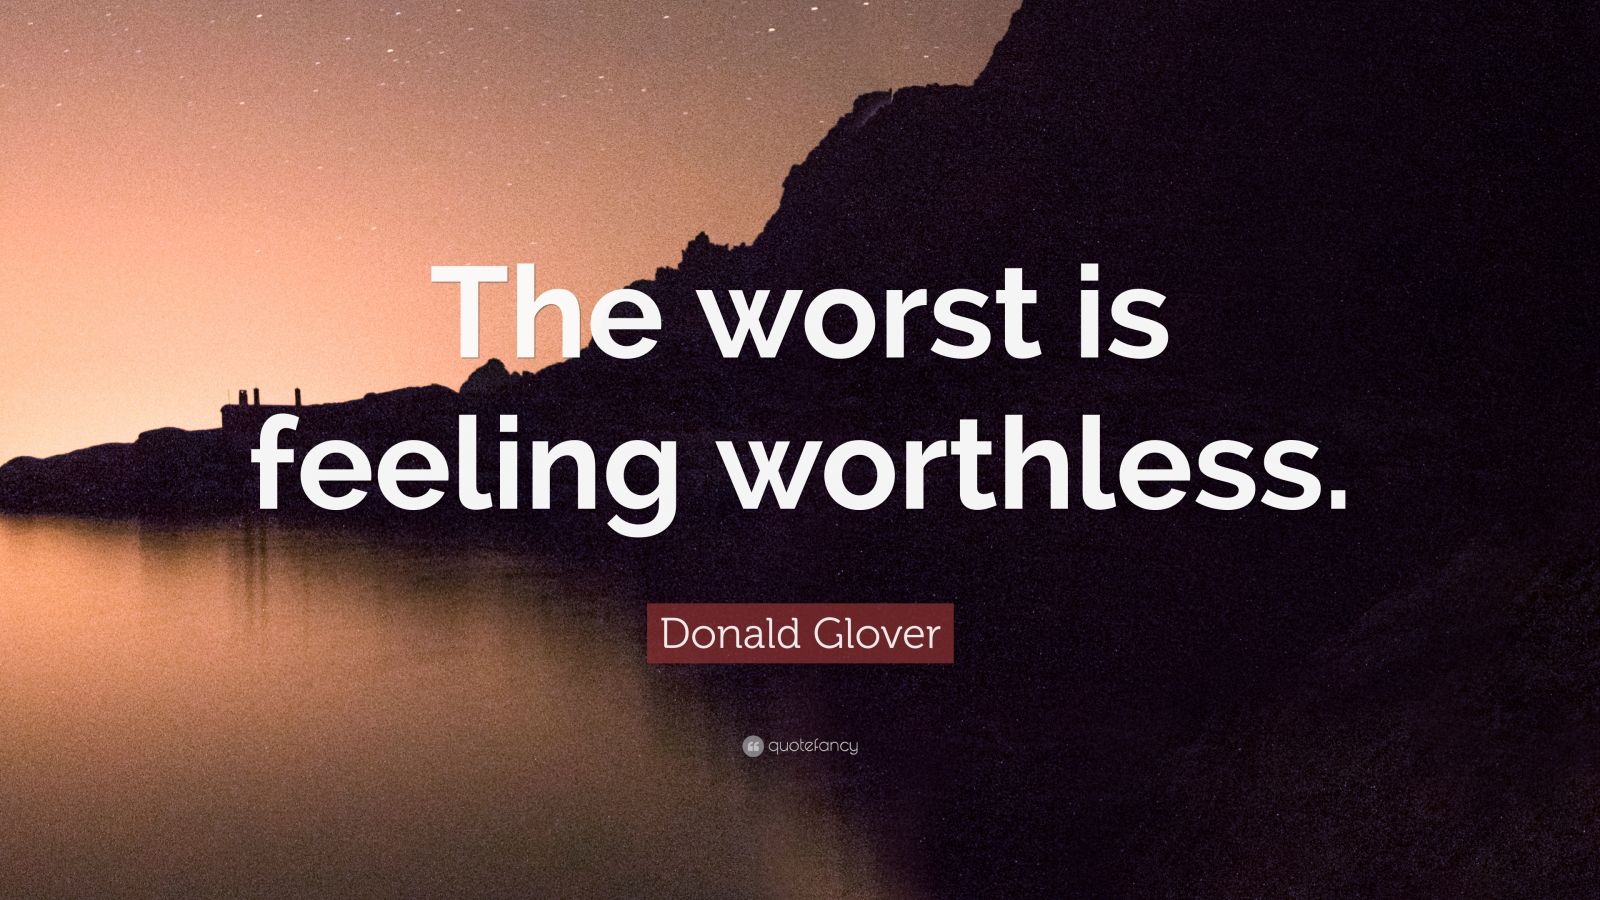 Best Feeling Worthless Quotes of the decade The ultimate guide 